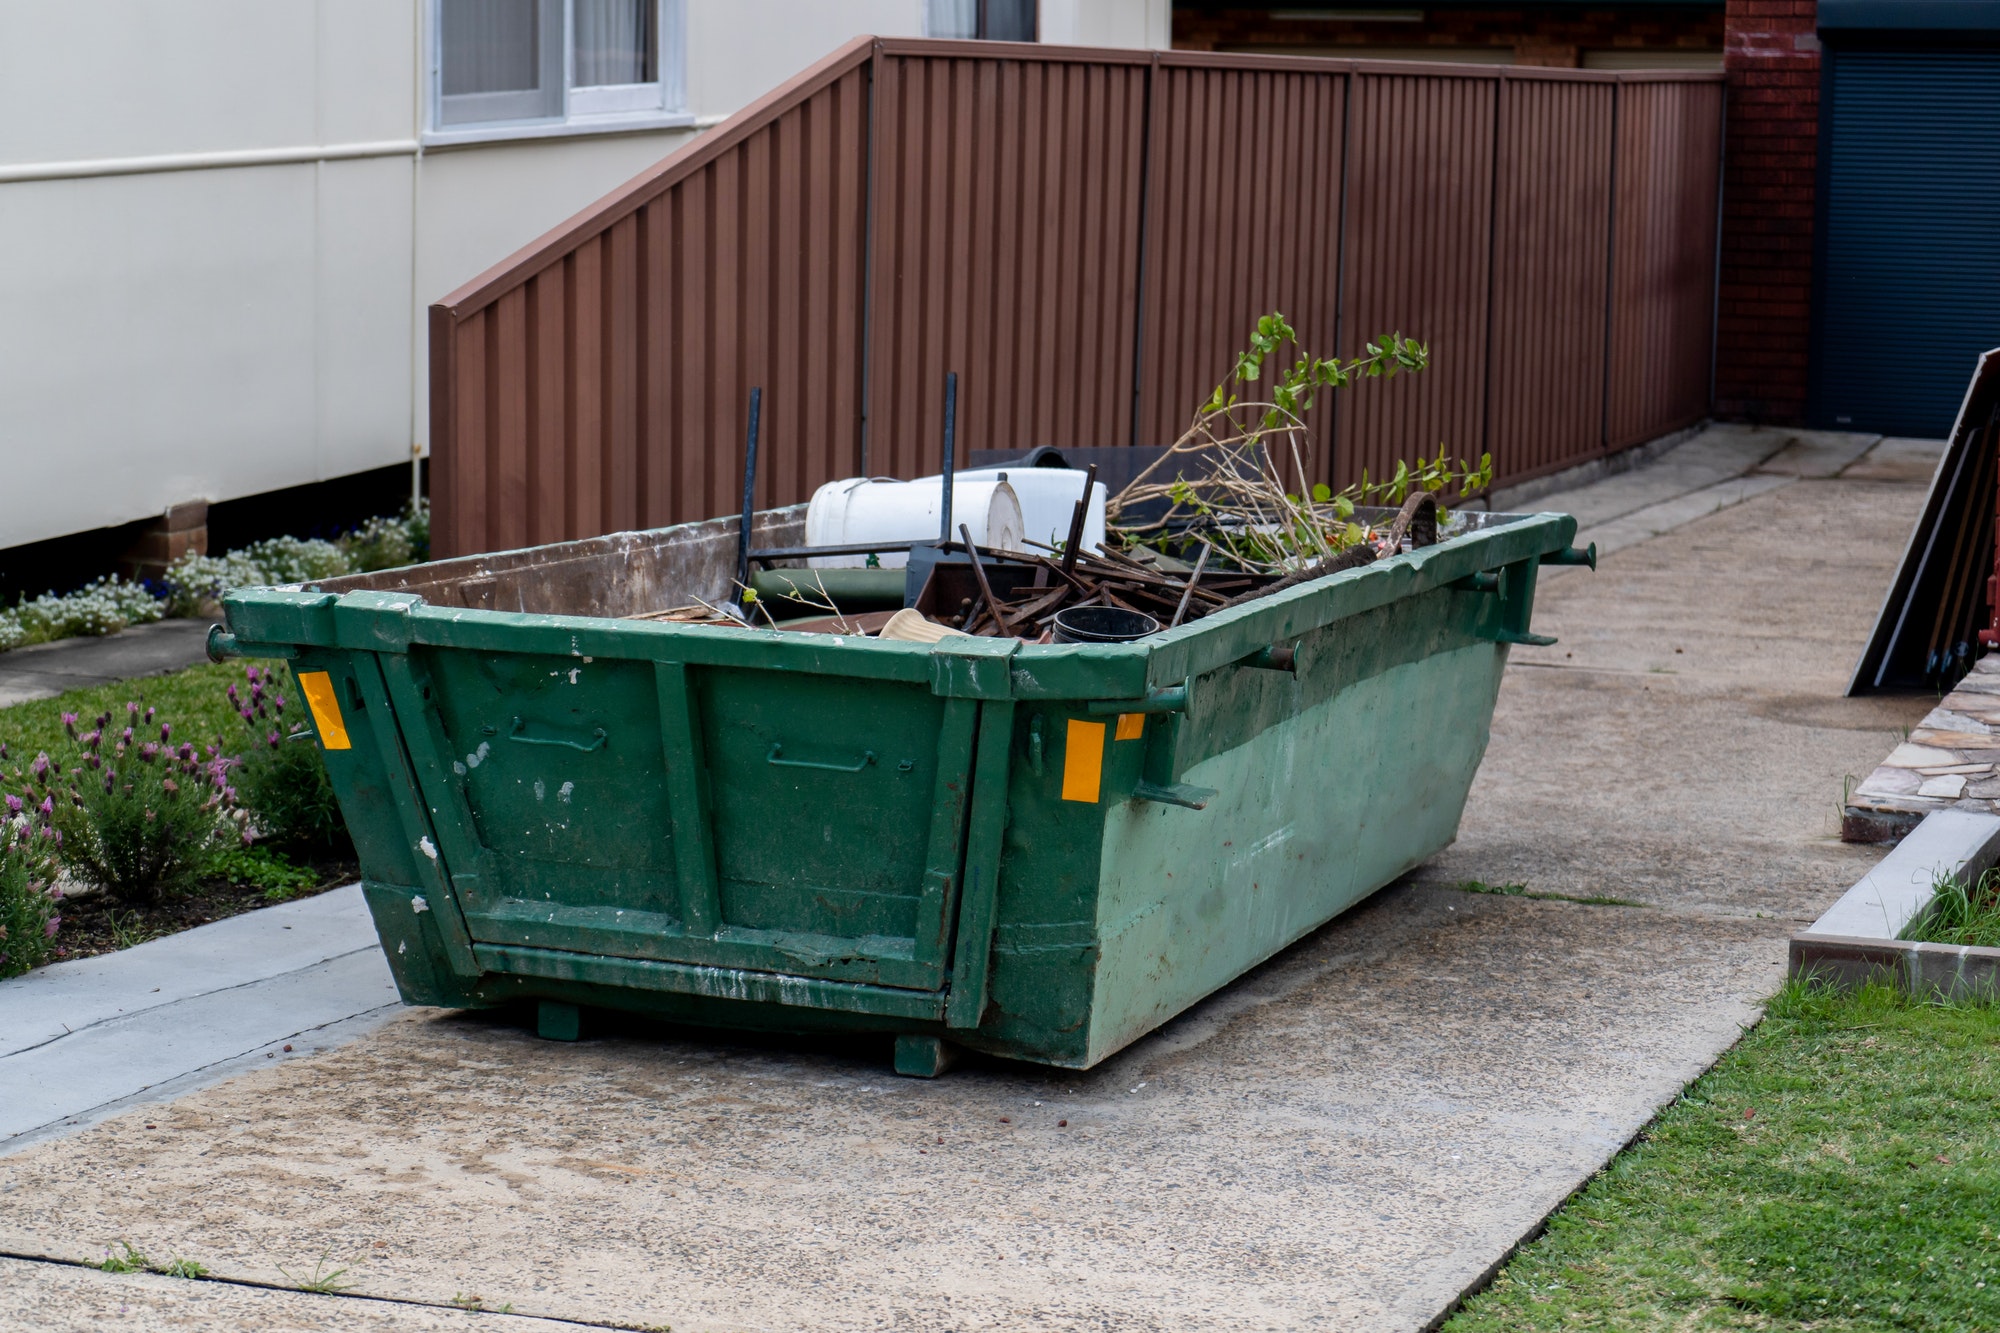 Skip bin full of household waste rubbish. House clean up and renovation concept. Waste management